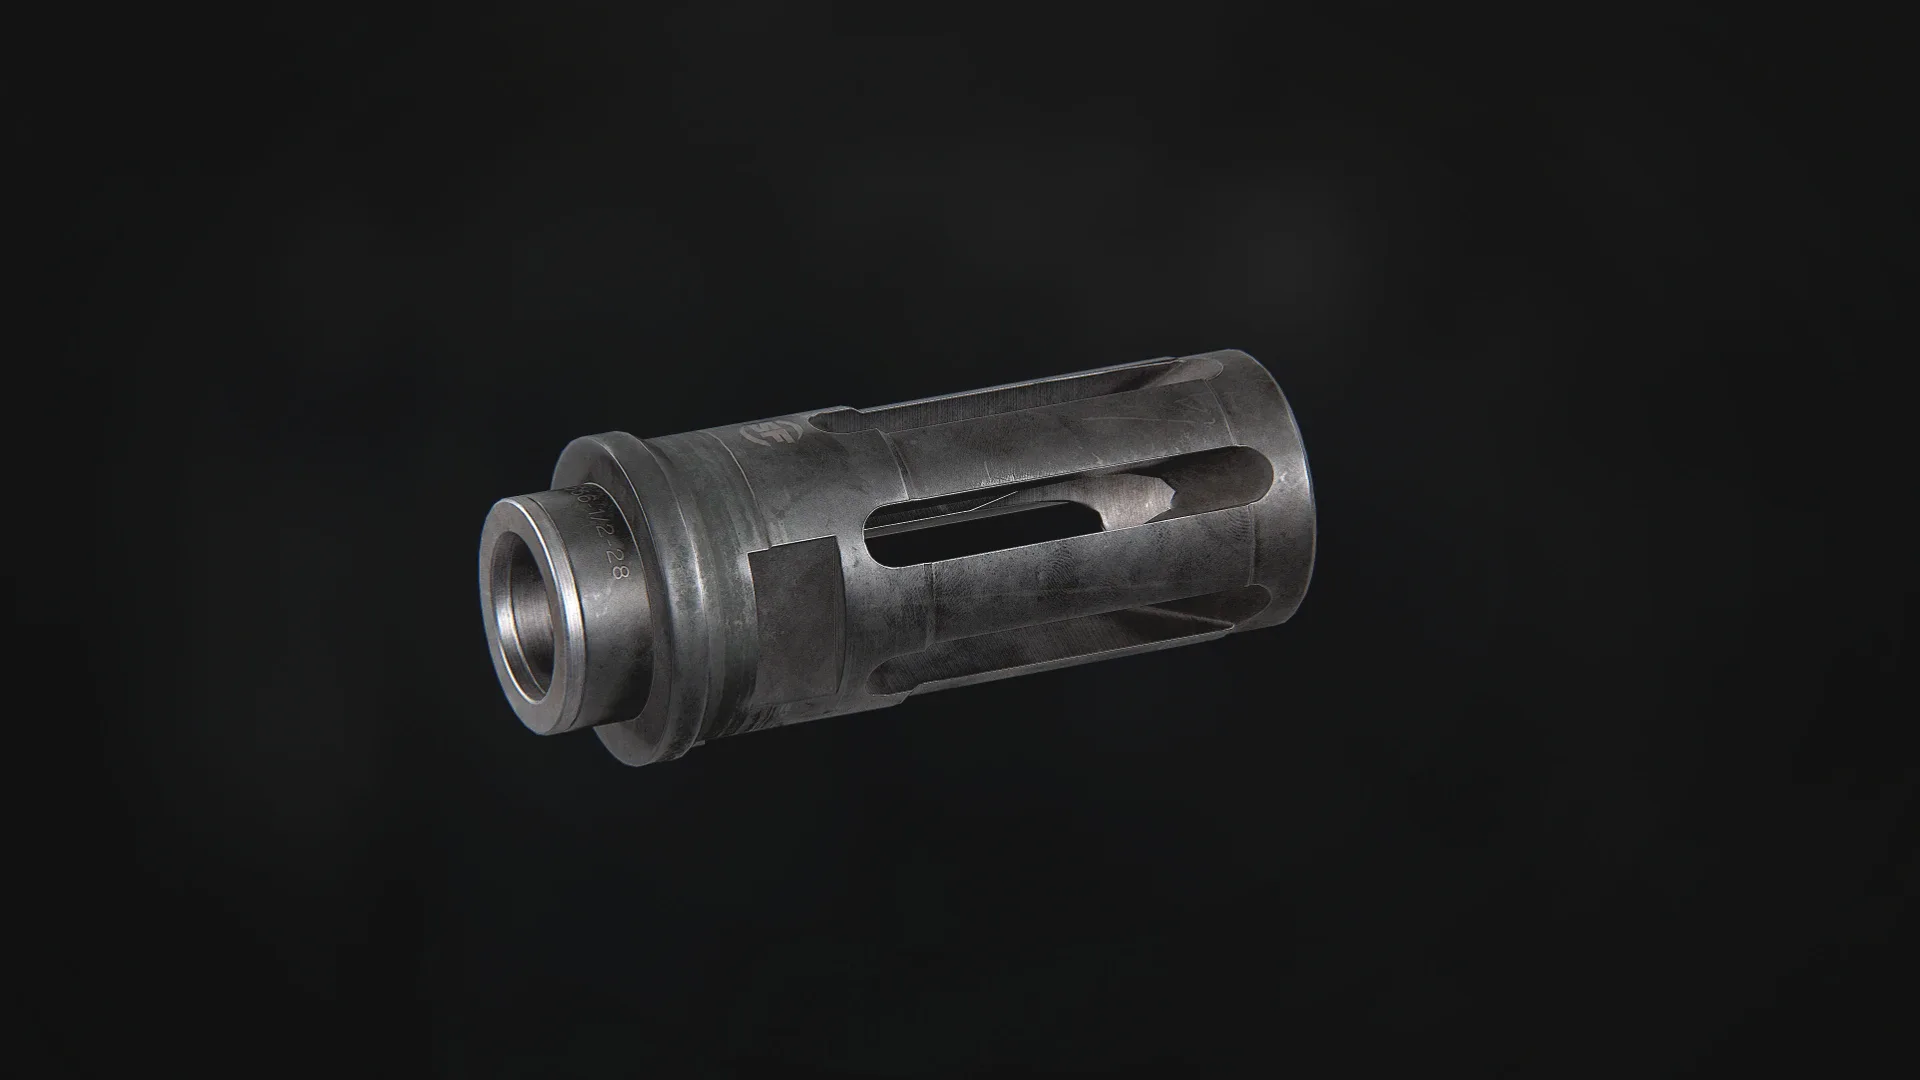 SFCT-556 Closed-Tine Flash Hider - Game Ready